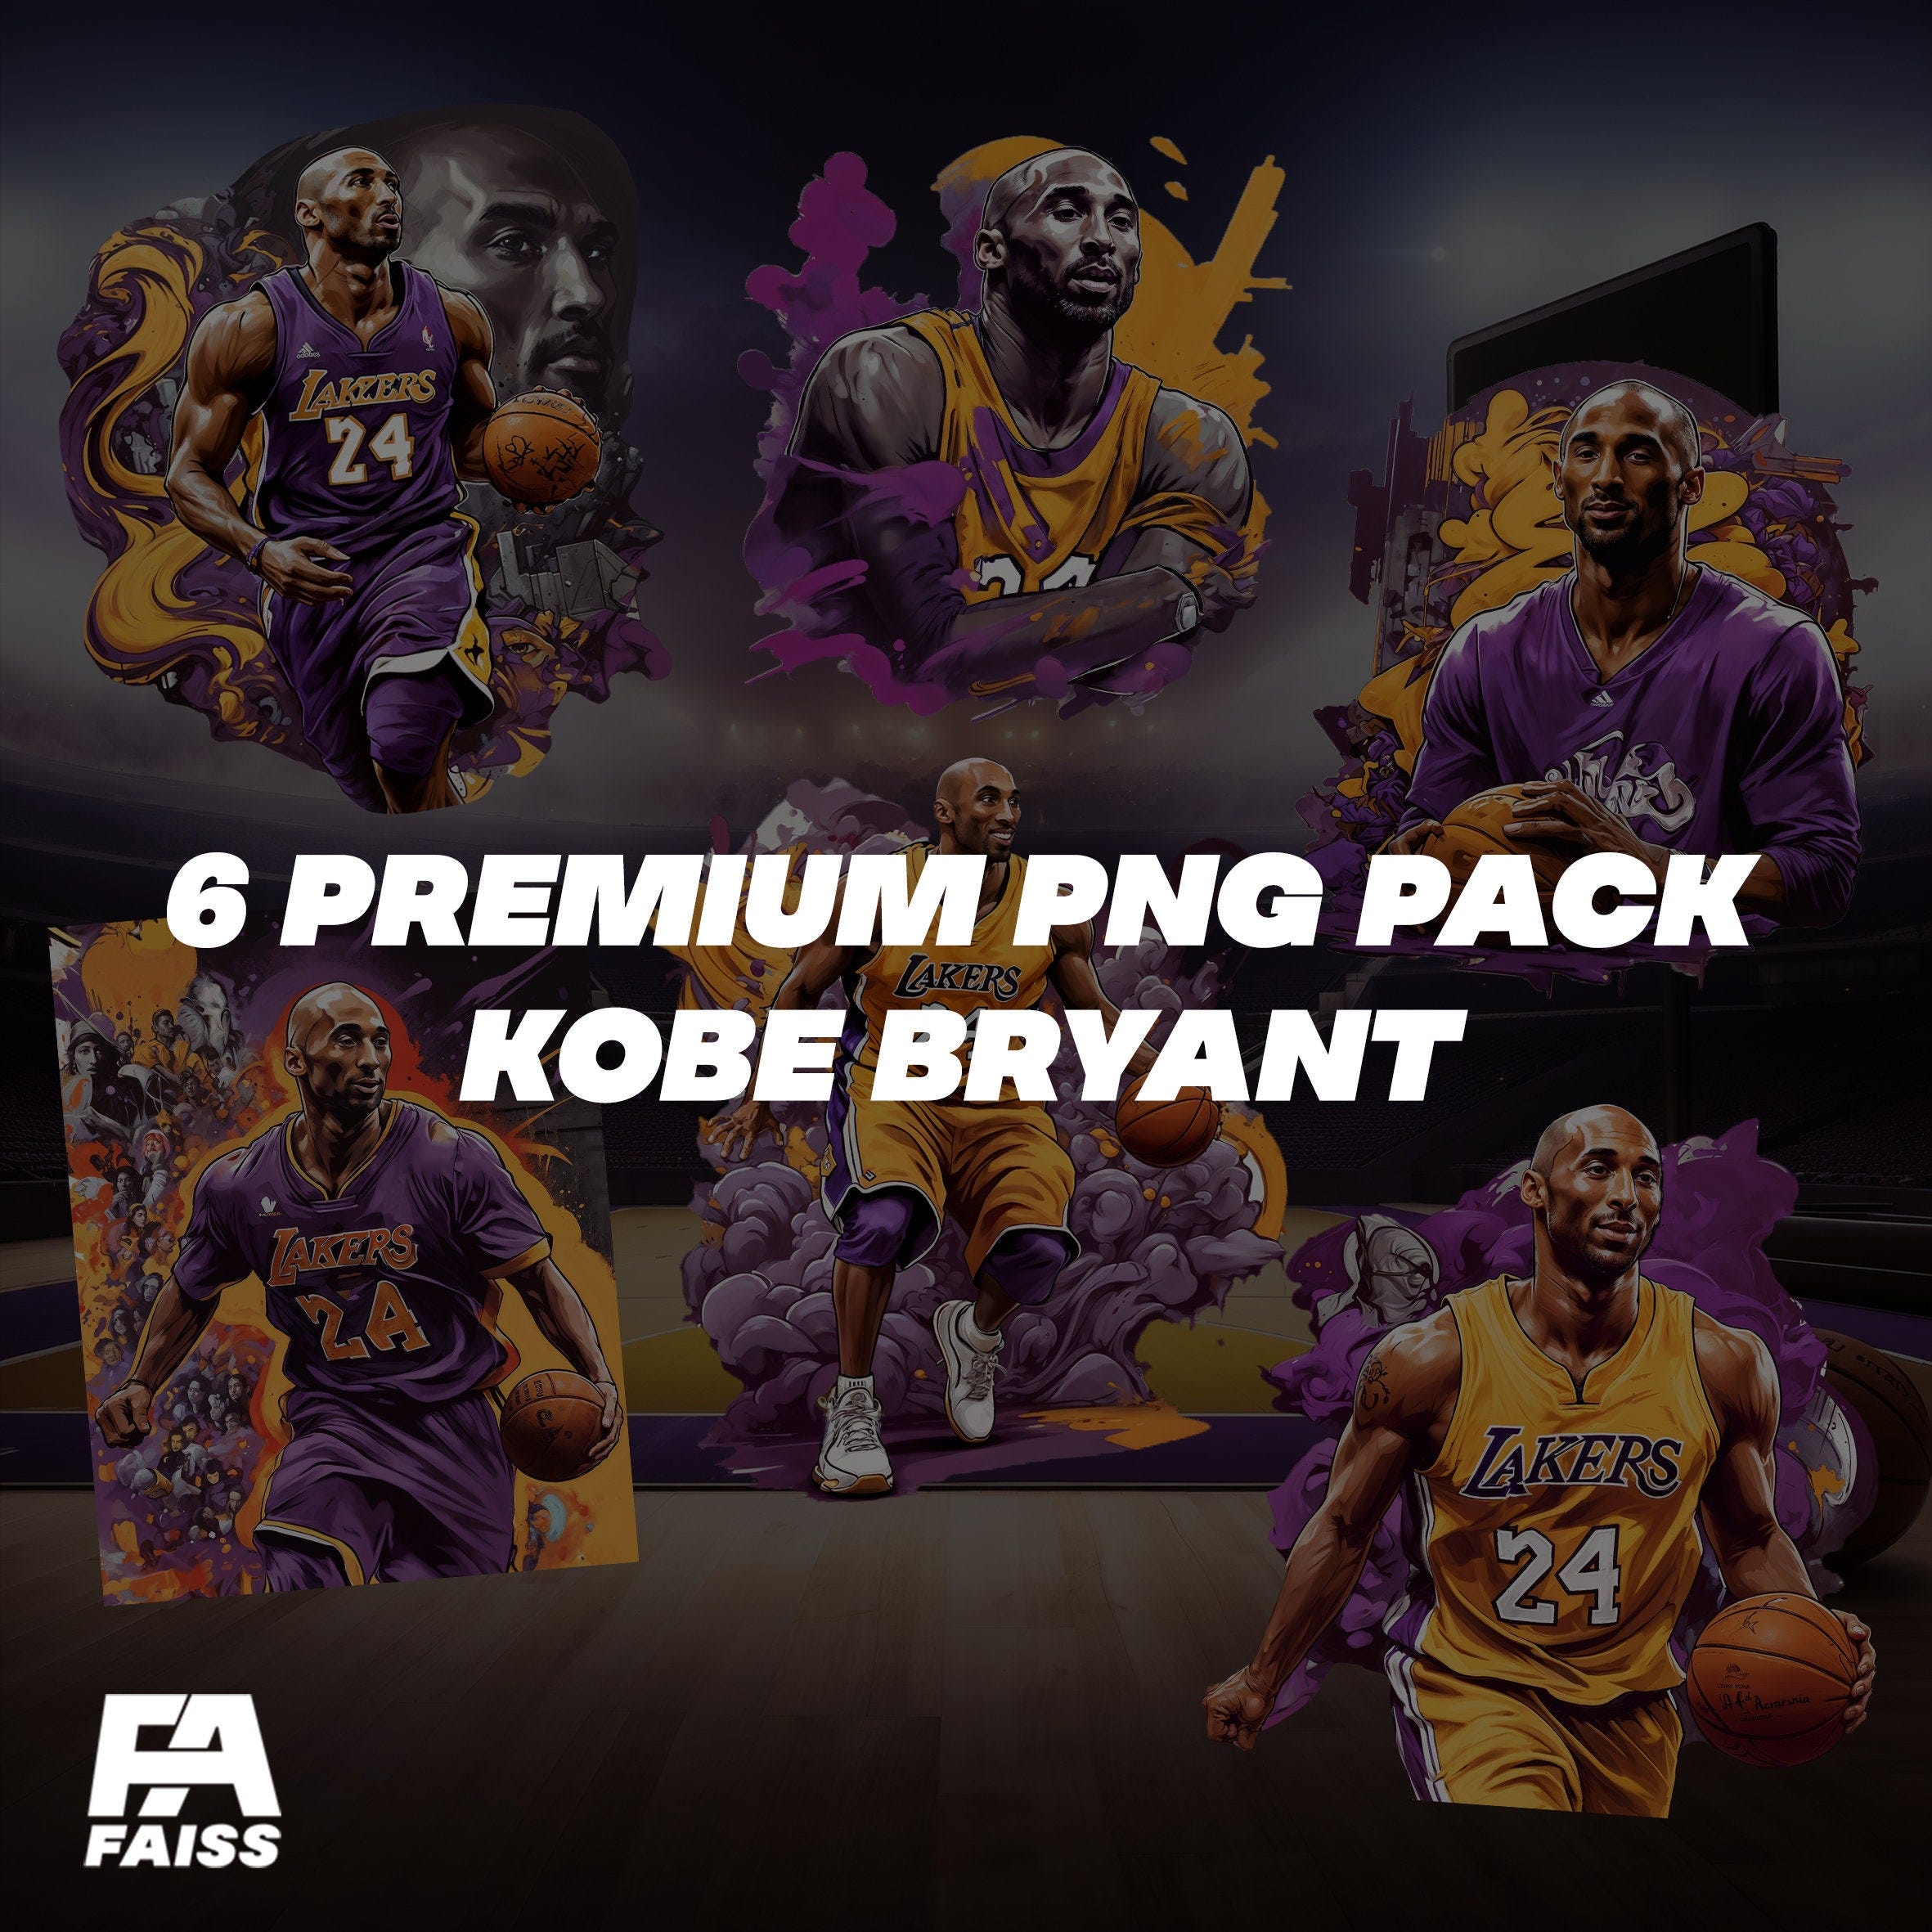 Kobe Bryant PNG Bundle - 6 Premium PNG,Cliparts for Basketball Fans and Graphic Designers | Exclusive Art for Digital Projects and Printing!